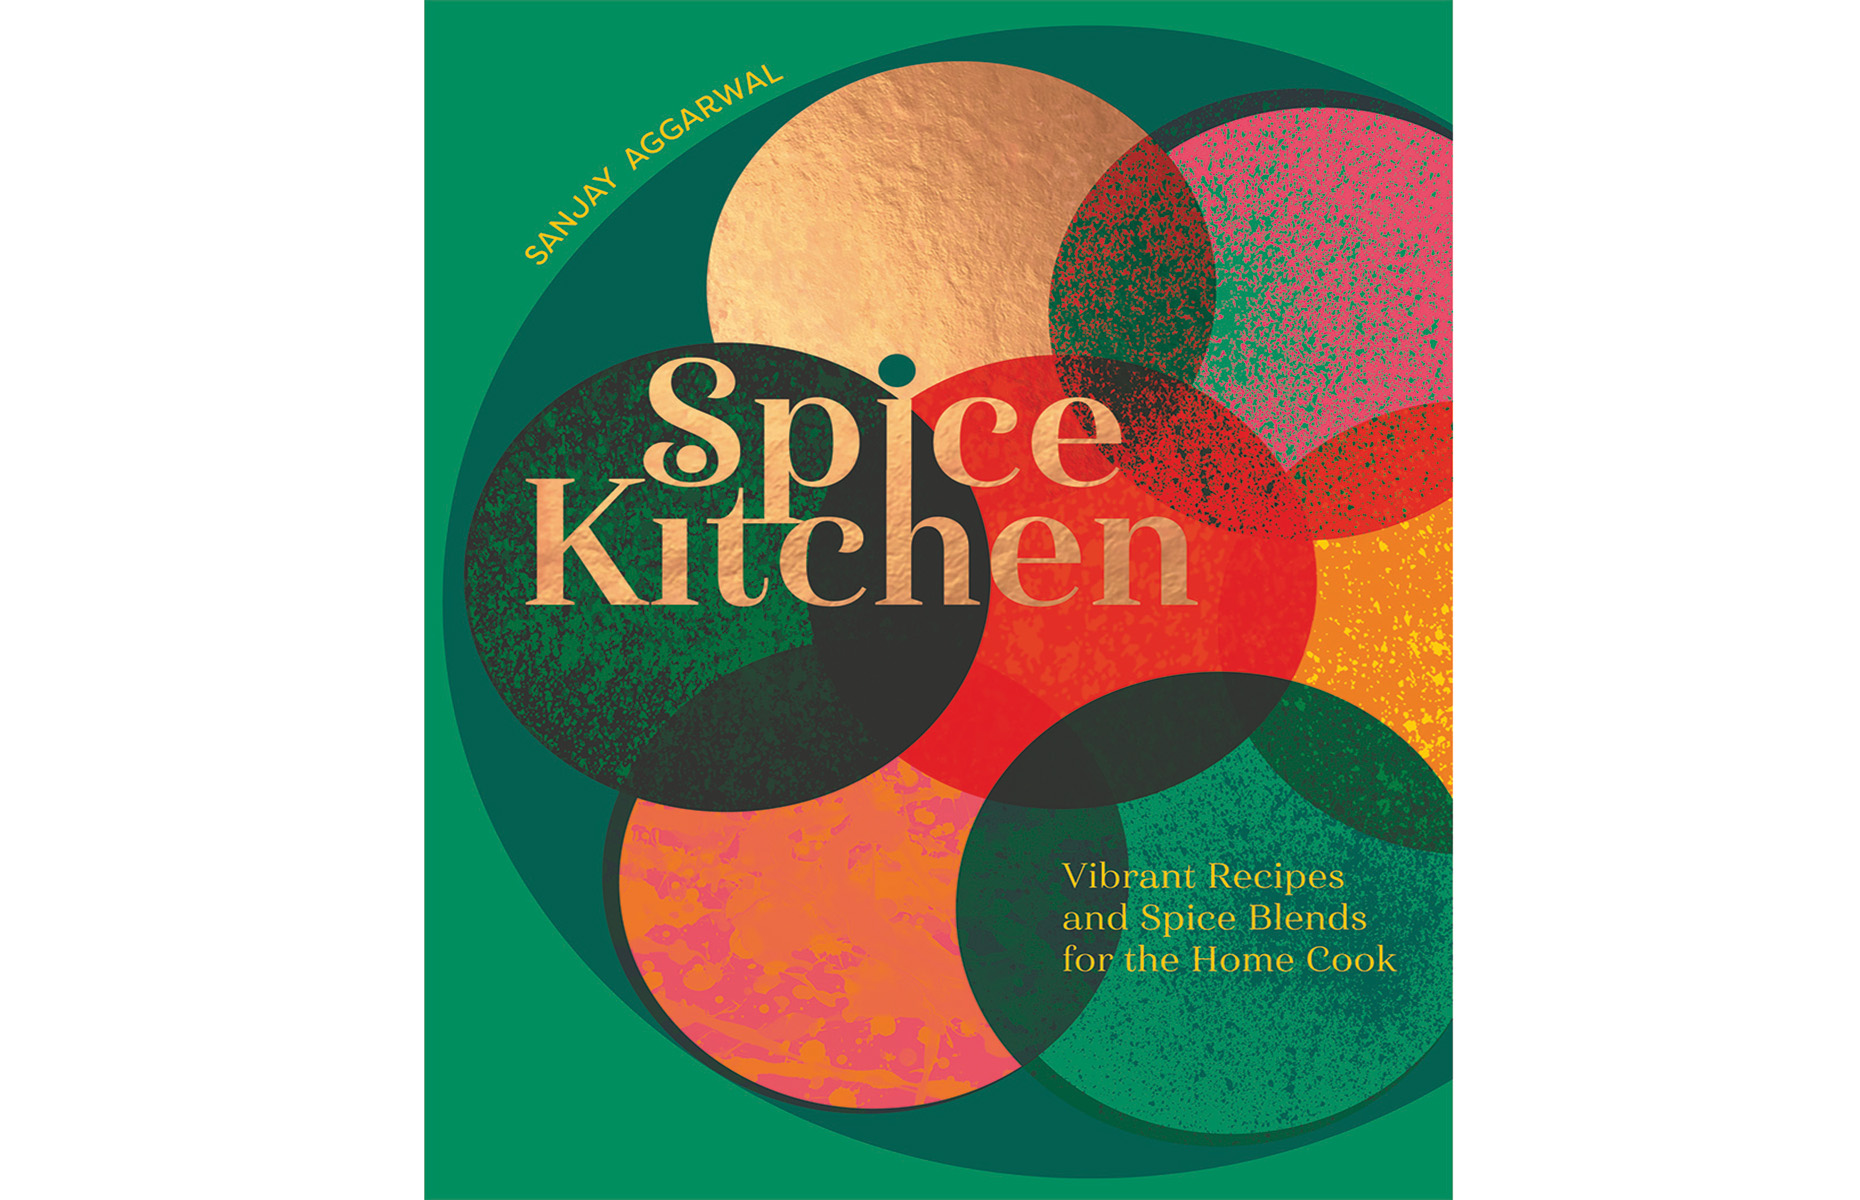 Spice Kitchen: Vibrant Recipes and Spice Blends for the Home Cook by Sanjay Aggarwal 